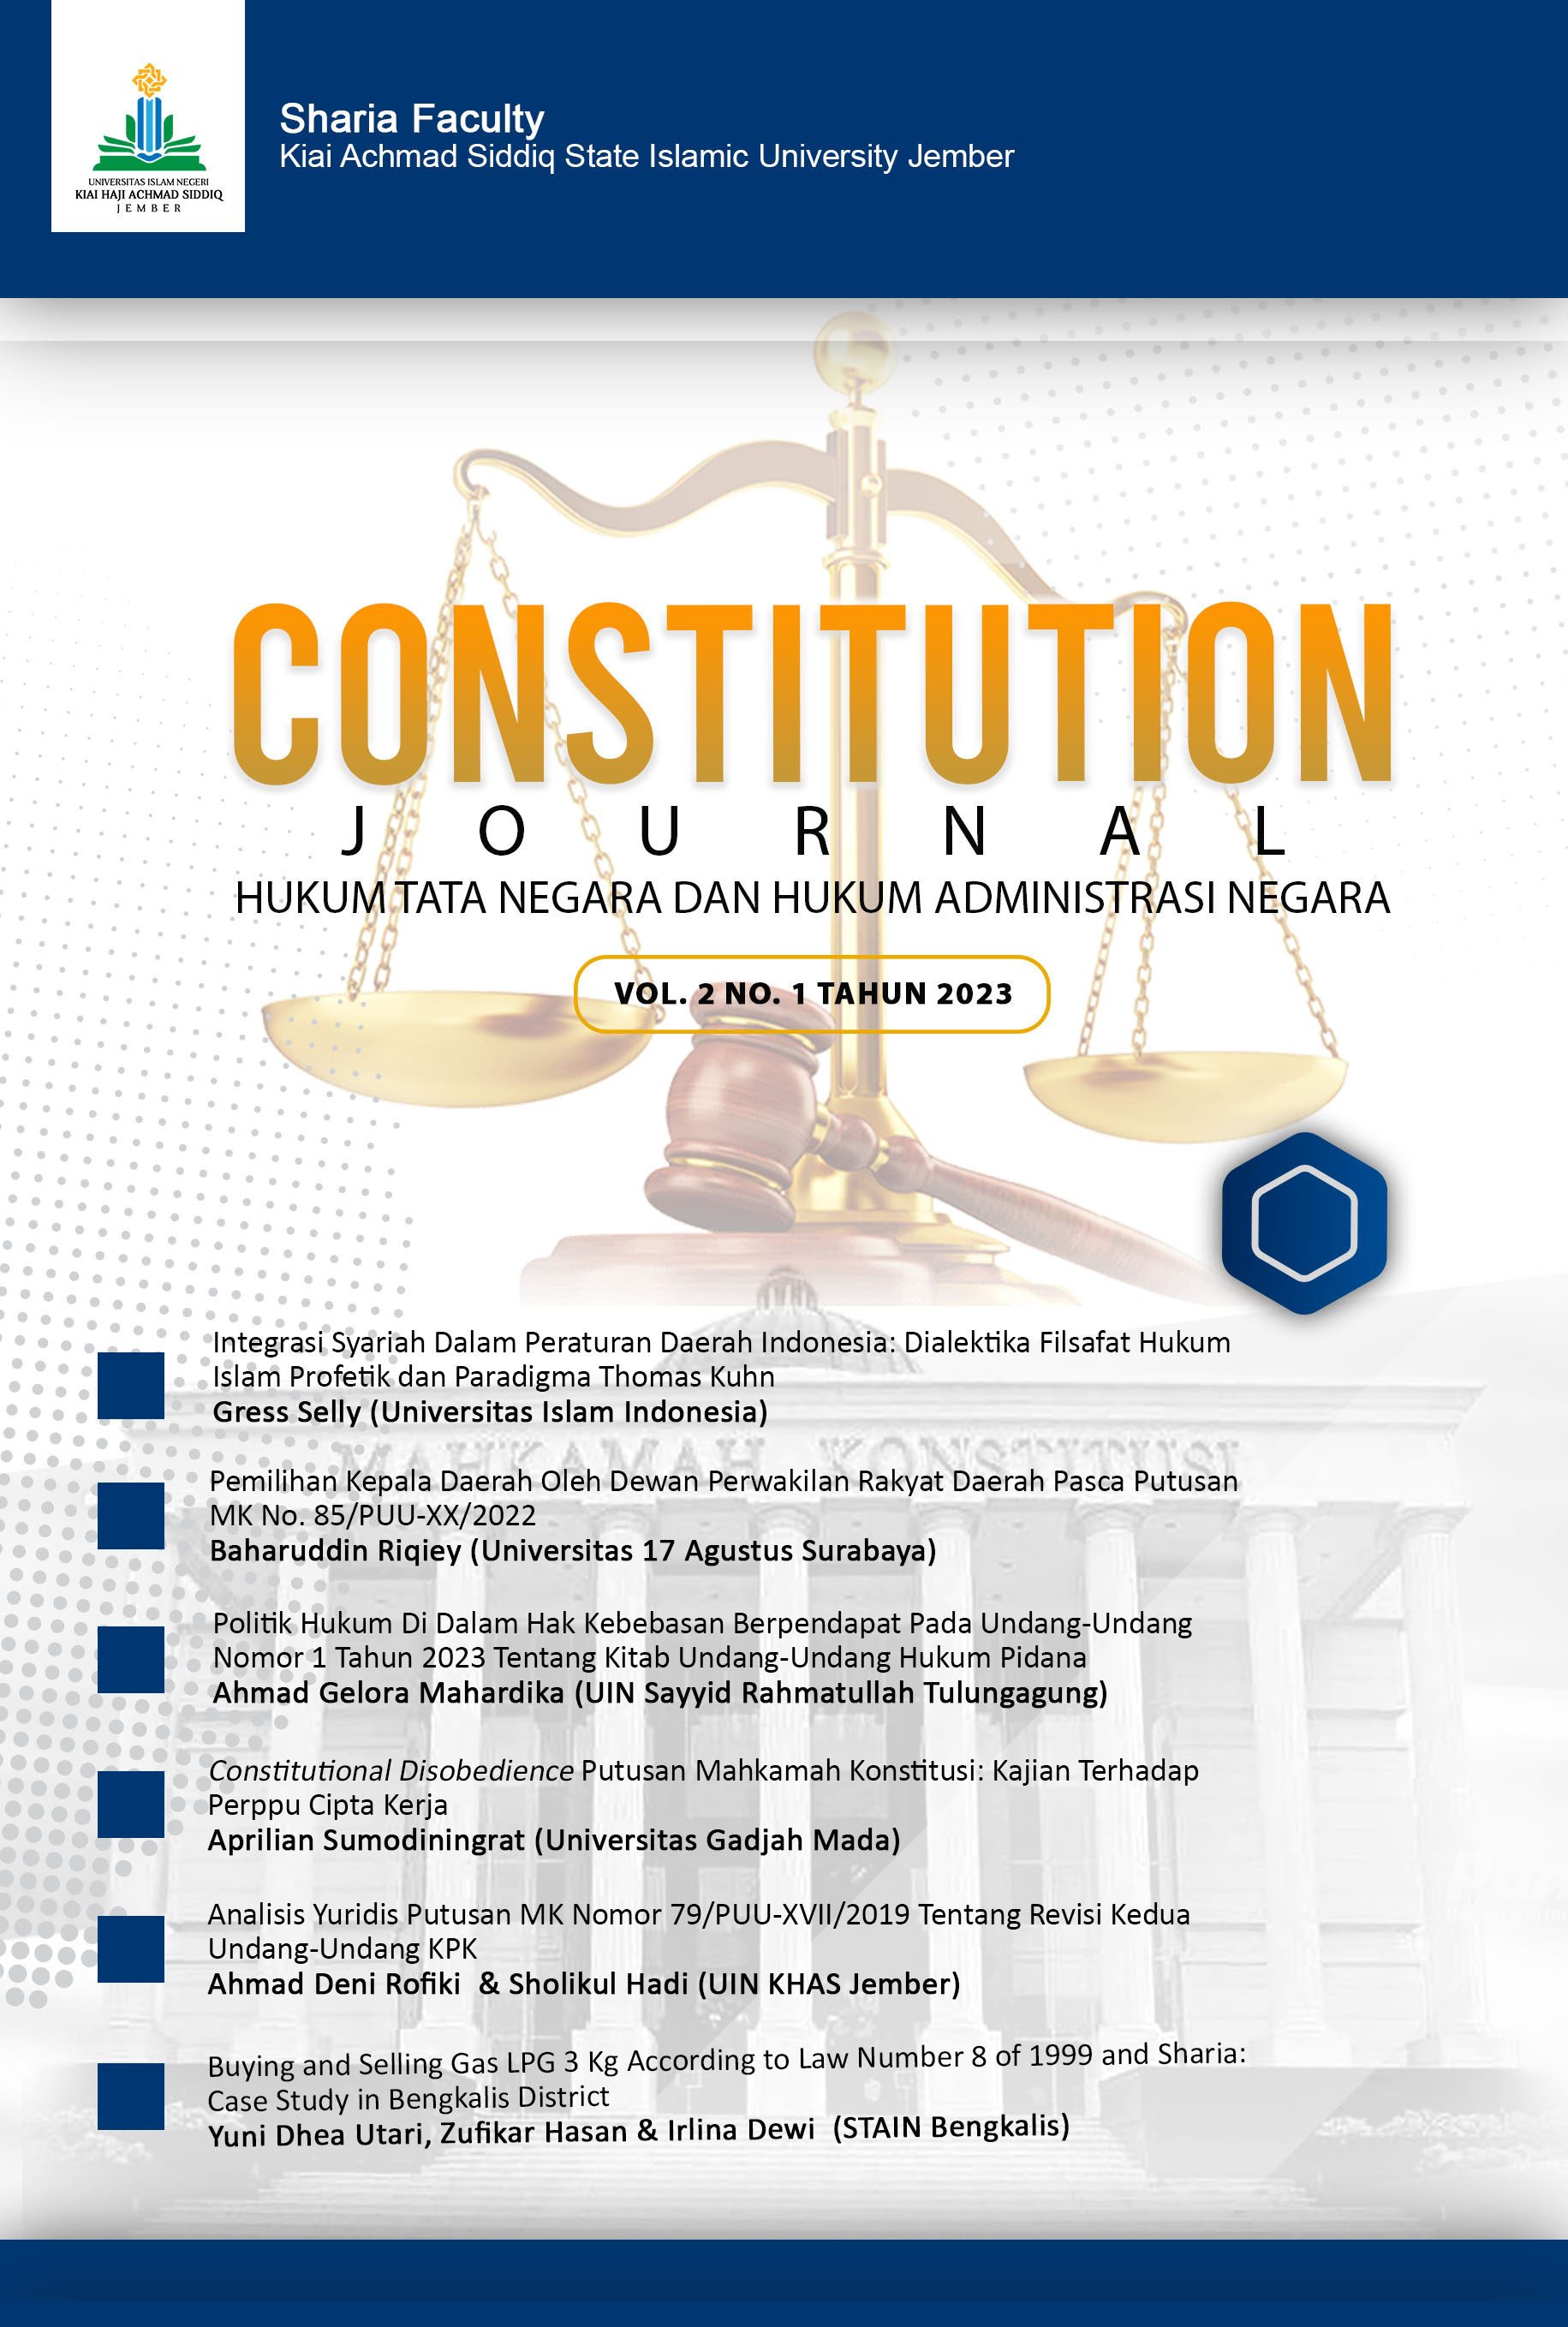 					View Vol. 2 No. 1 (2023): Constitution Journal June 2023
				